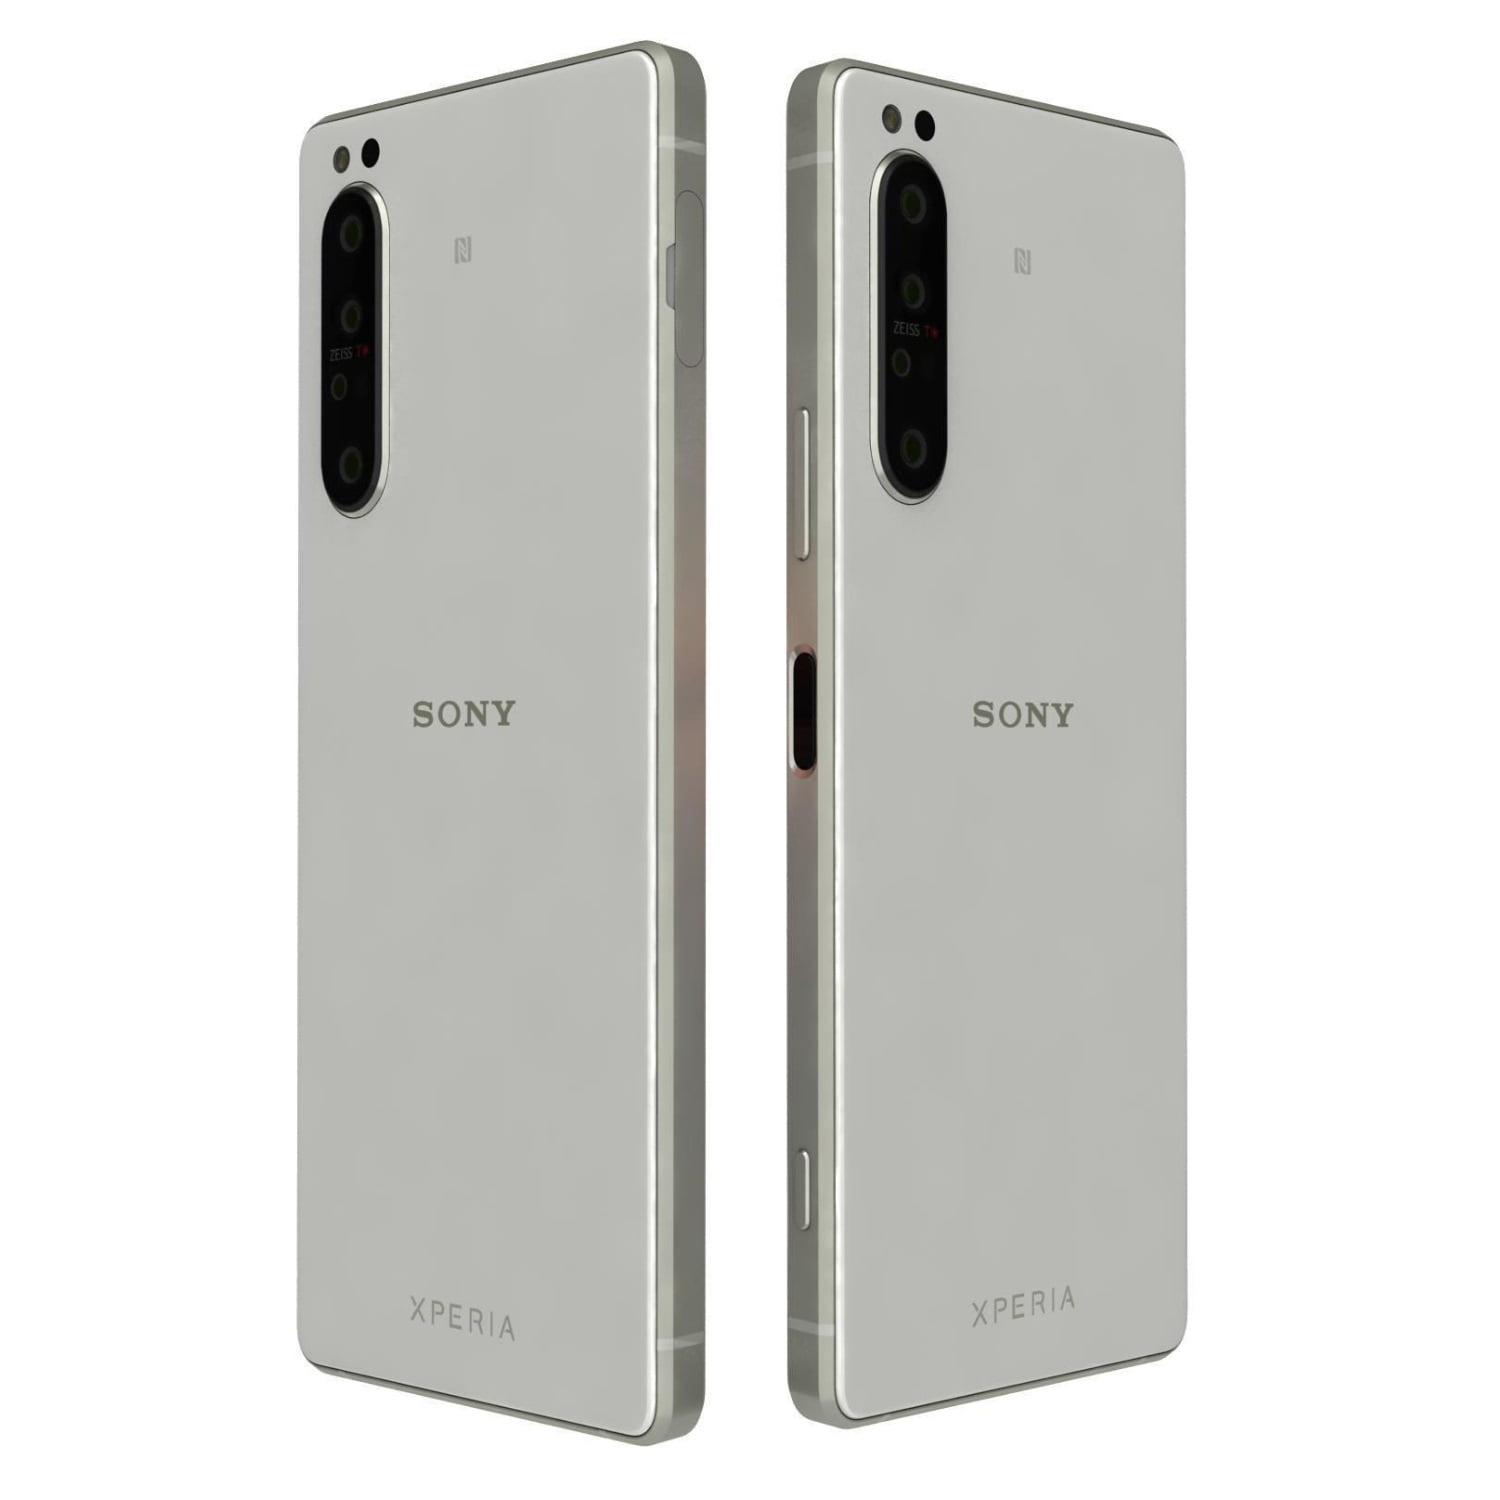 Sony Xperia 1 III 512GB XQ-BC72 12GB RAM GSM Factory Unlocked Smartphone -  Frosted Grey